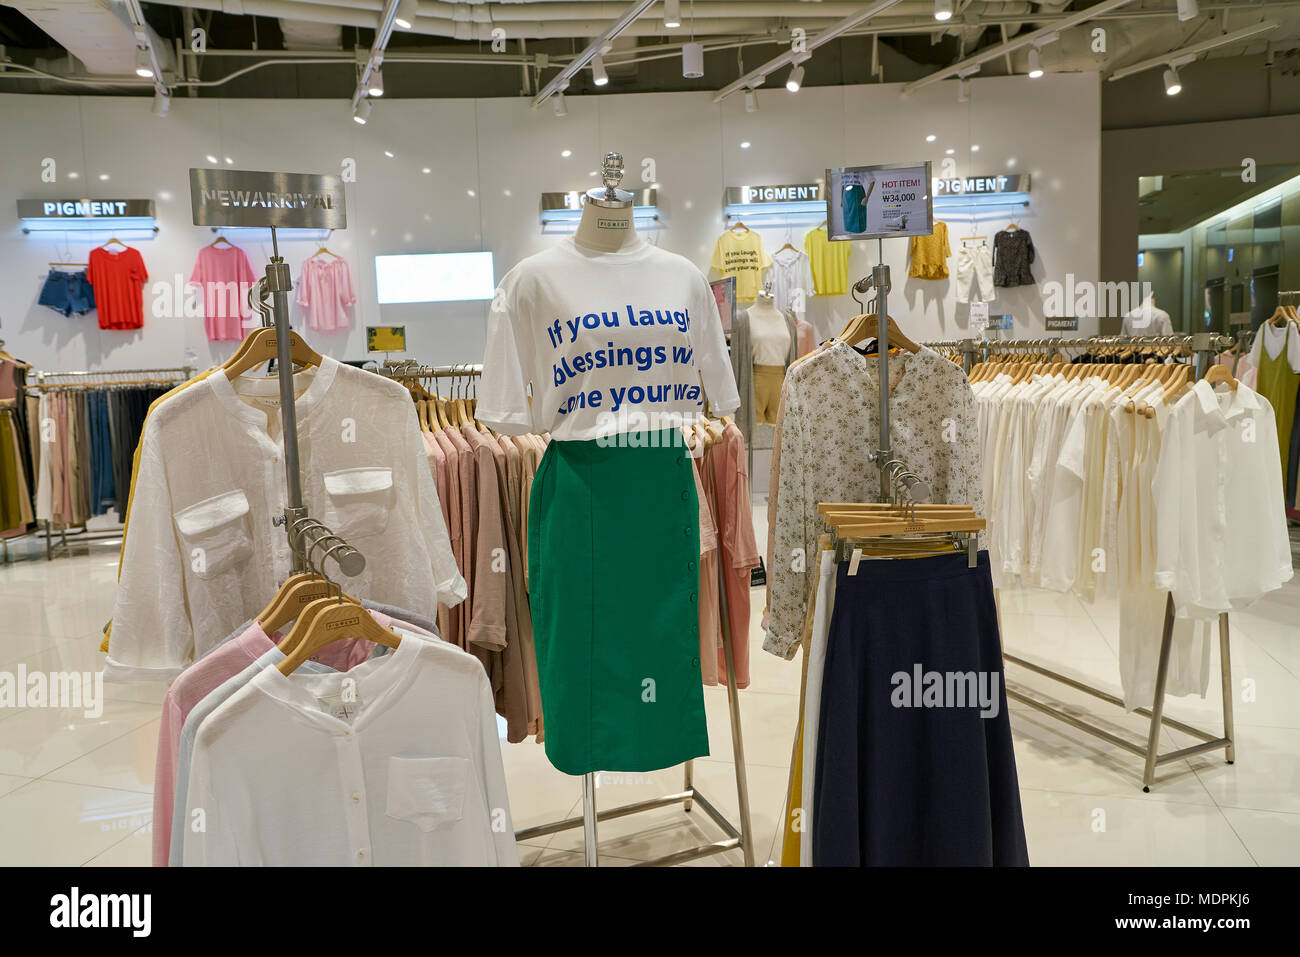 BUSAN, SOUTH KOREA - MAY 28, 2017: a clothing store at Lotte Department ...